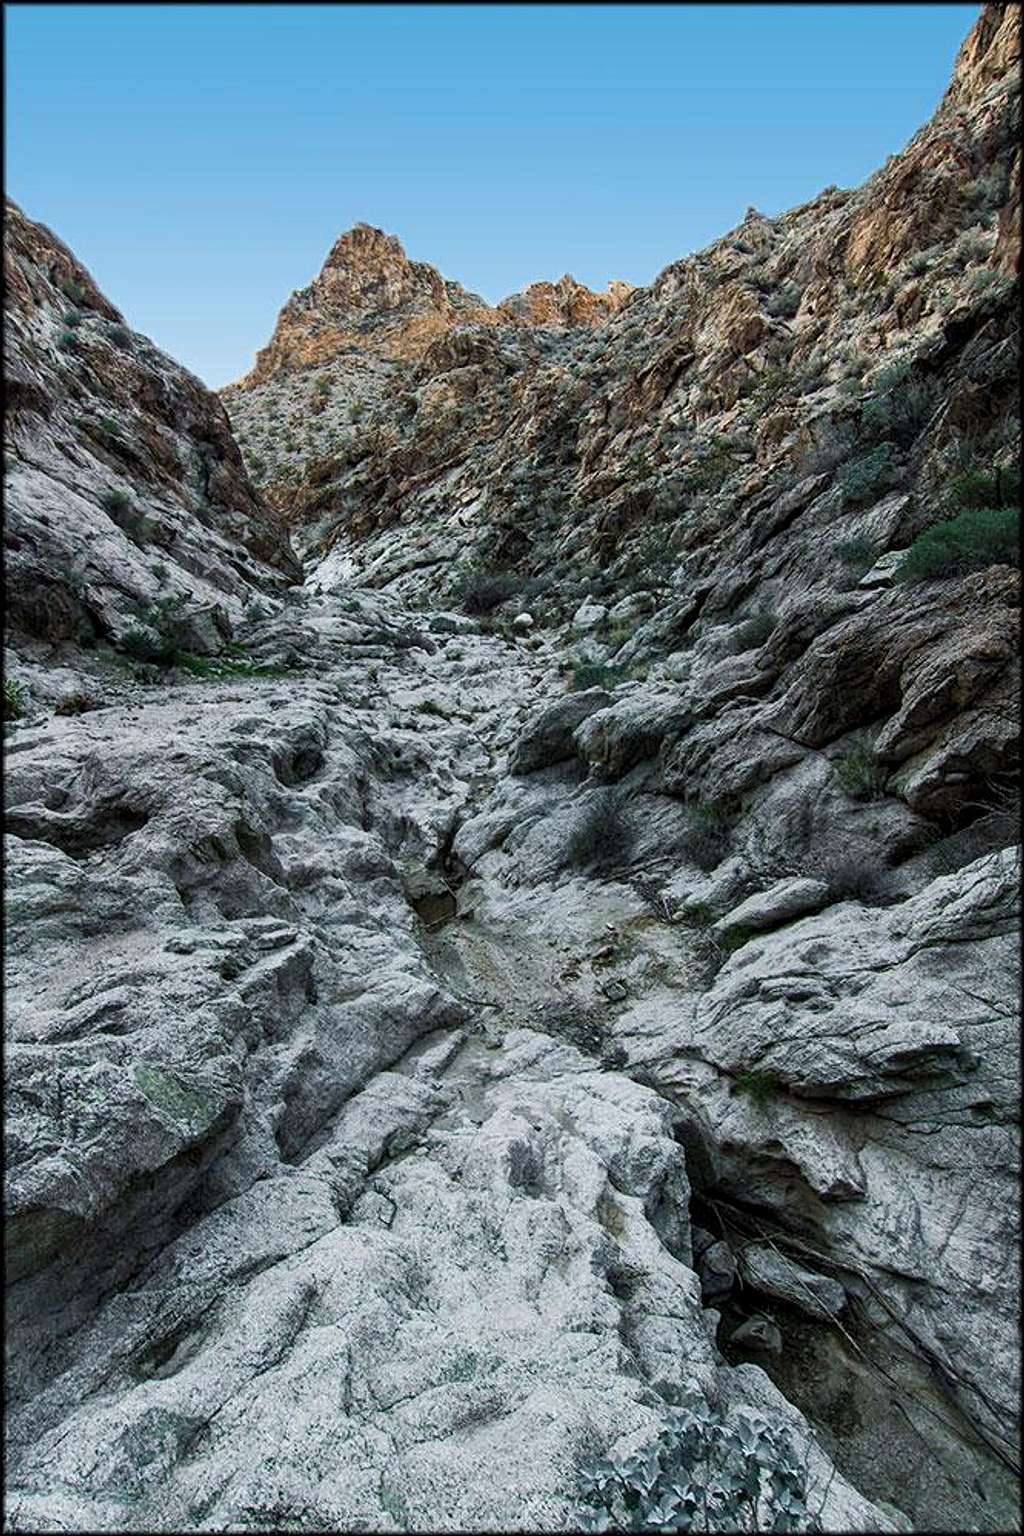 Lower Grapevine Canyon